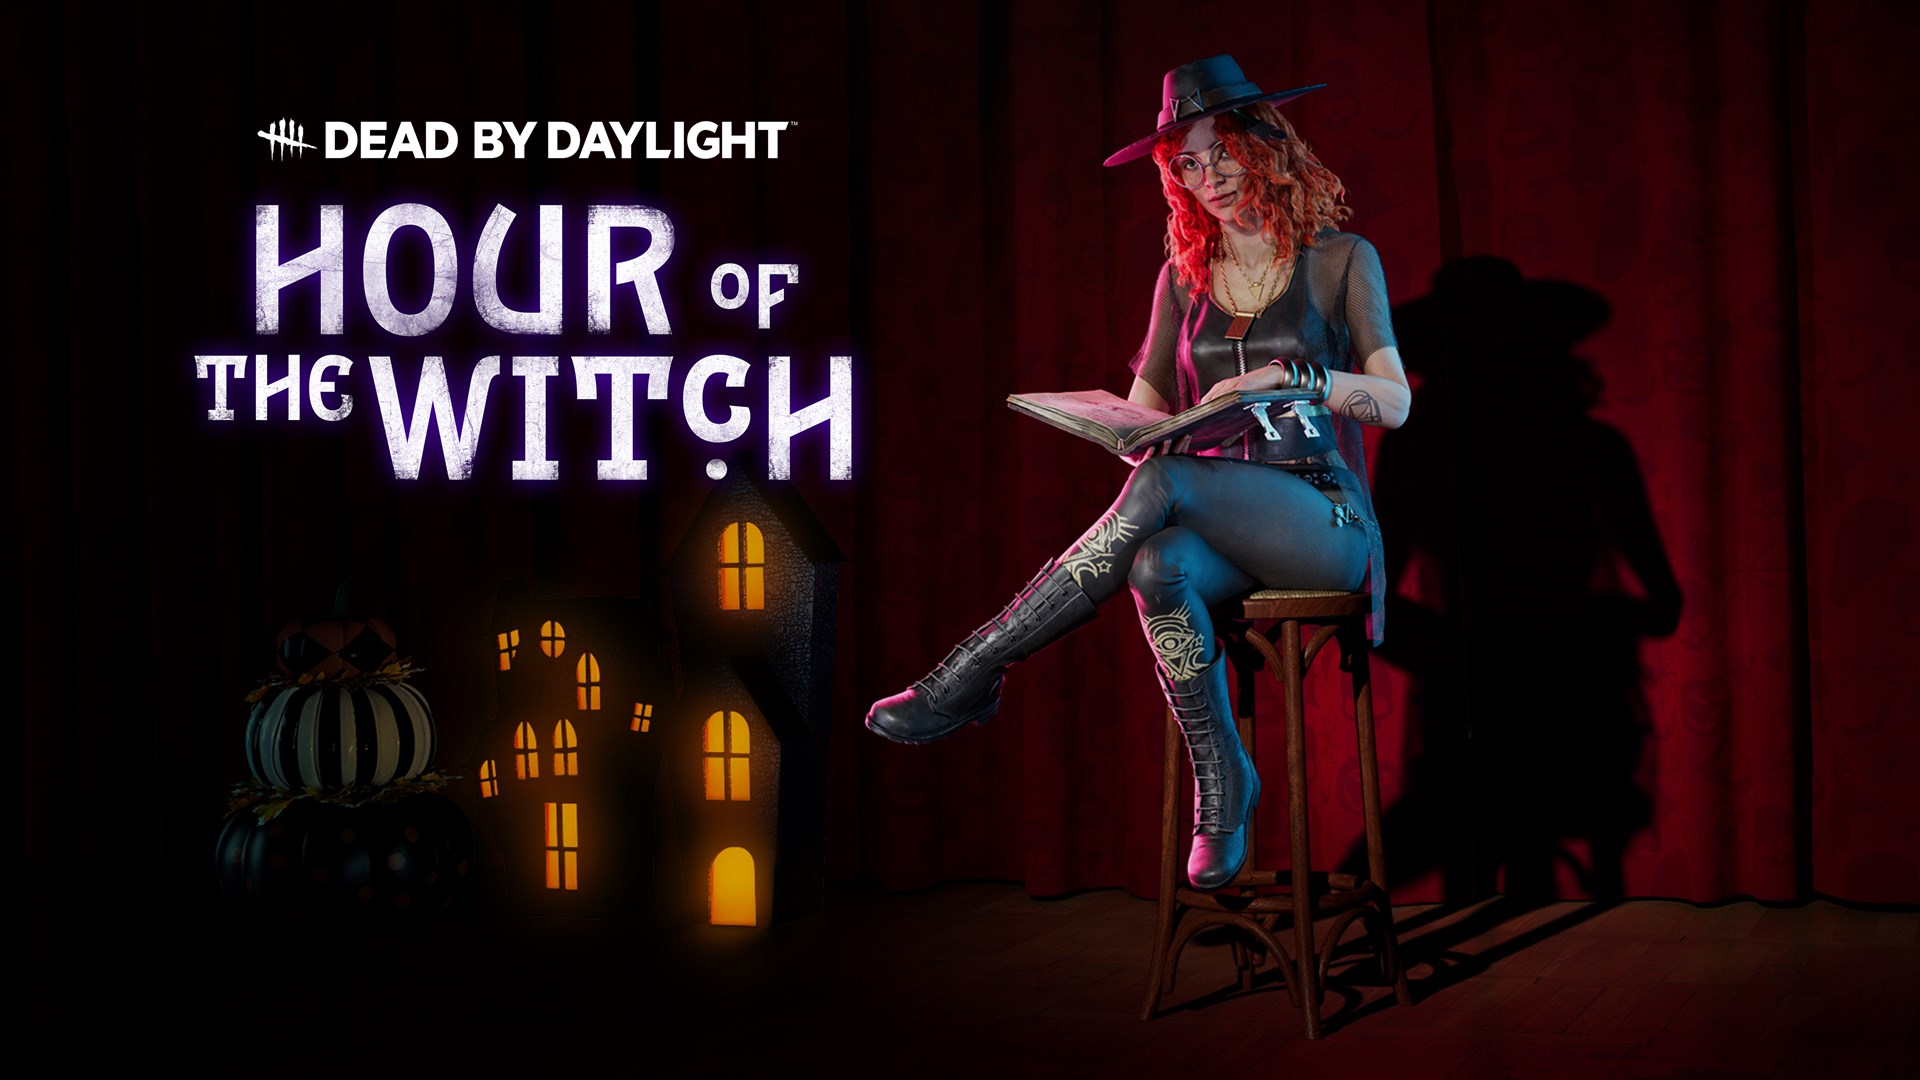 Dead by Daylight: capítulo Hour of the Witch Windows